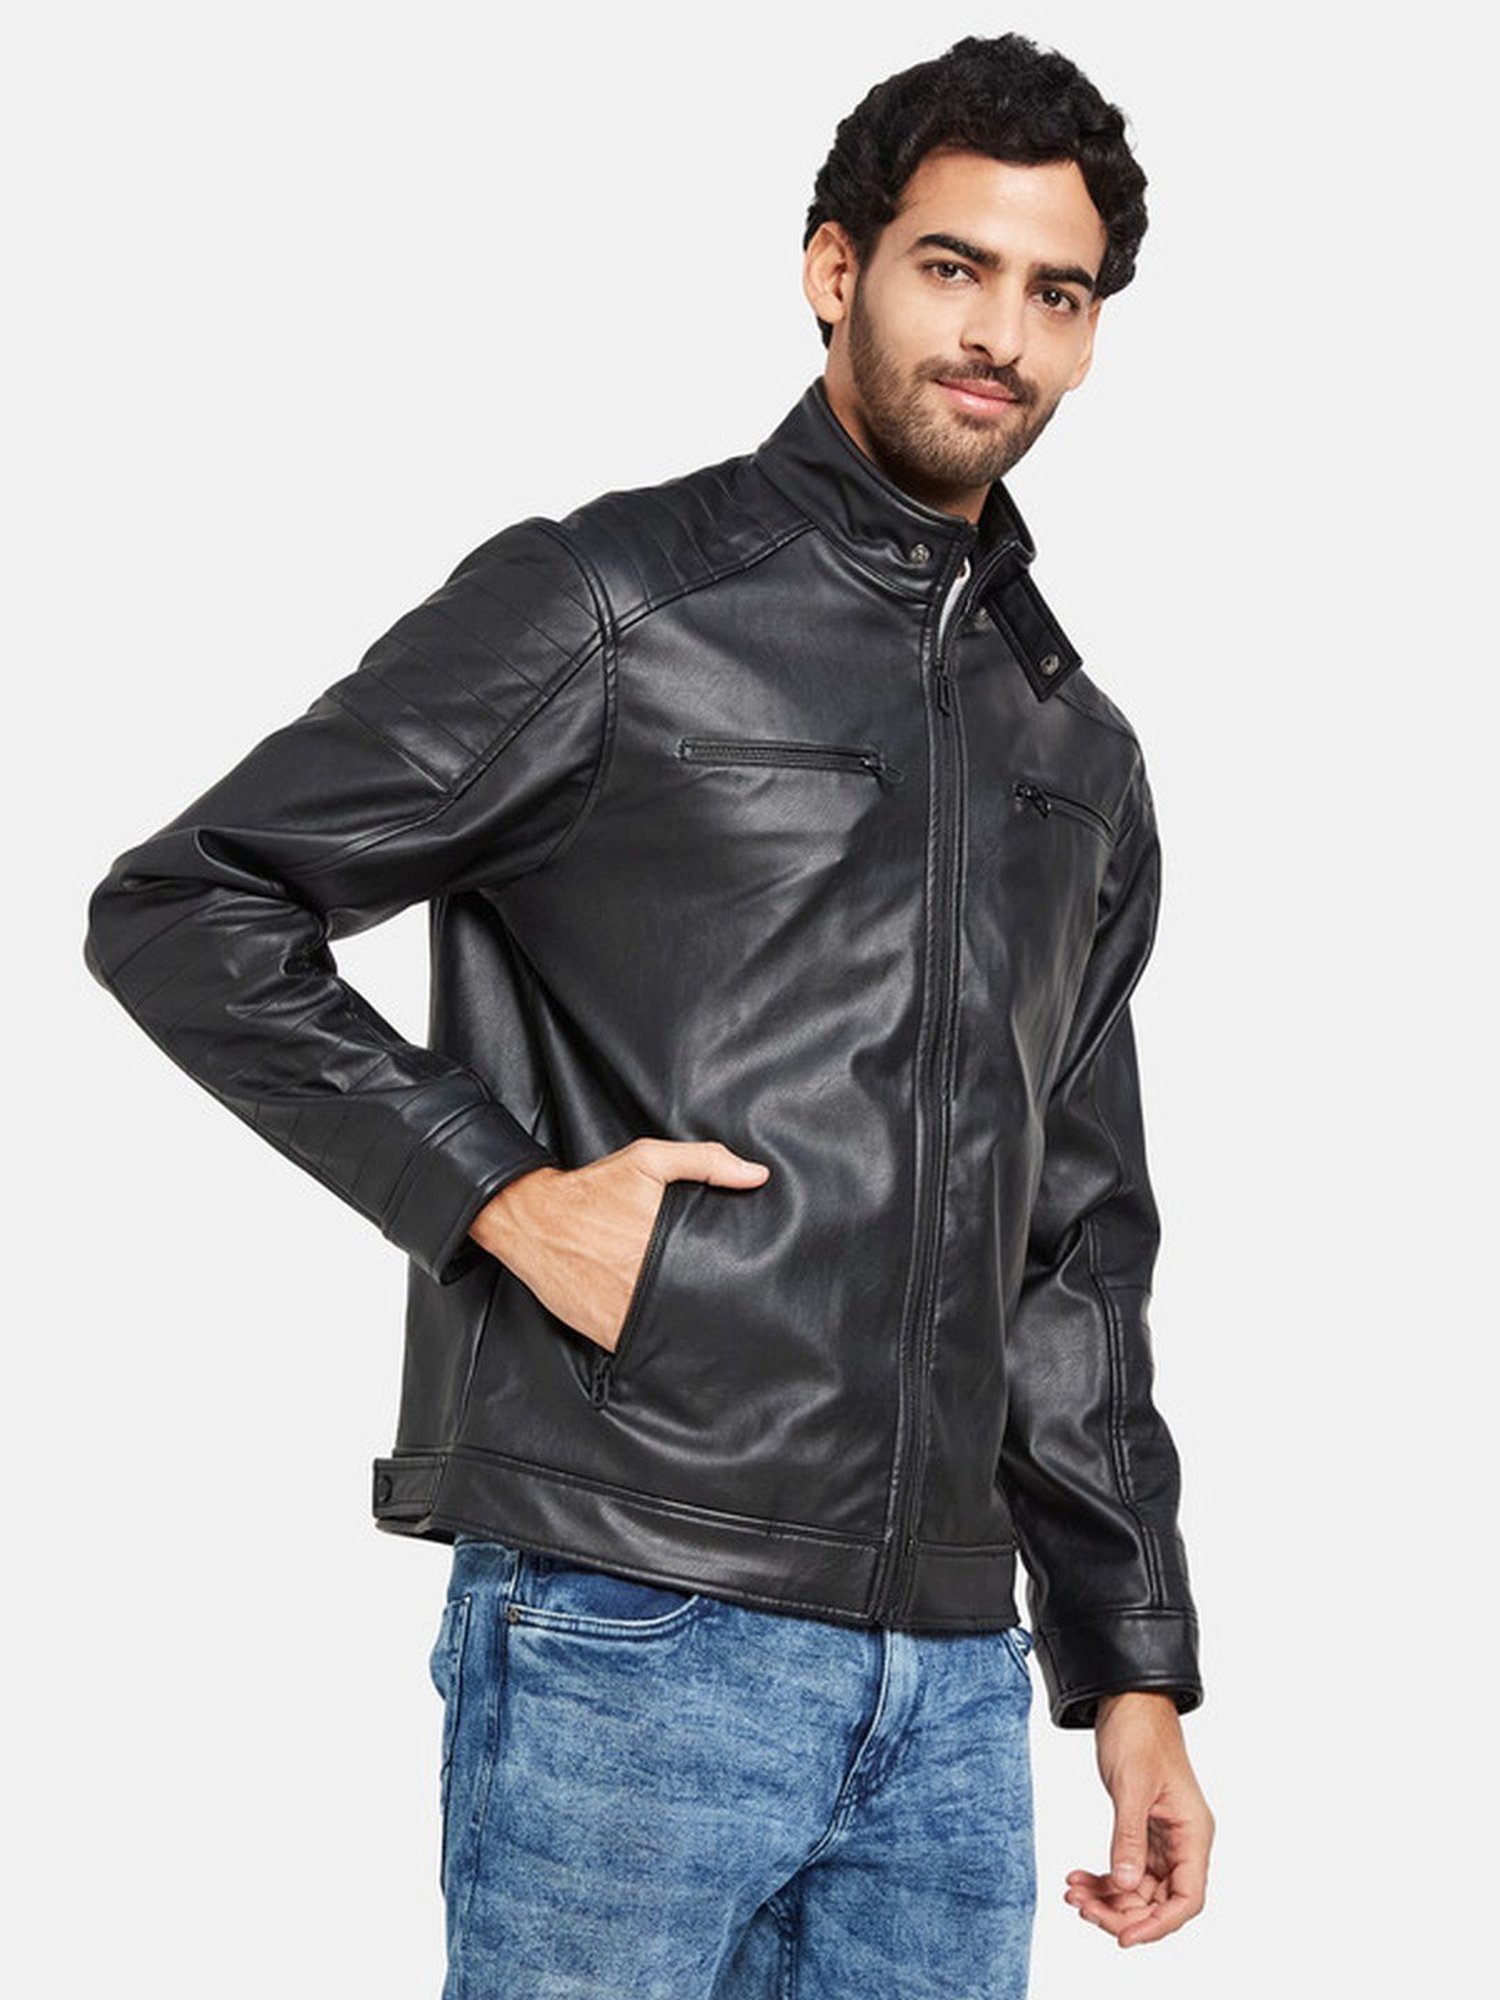 Men's jackets: Buy men's jacket from Adidas,Reebok and more at up to 50%  off on Tata Cliq | - Times of India